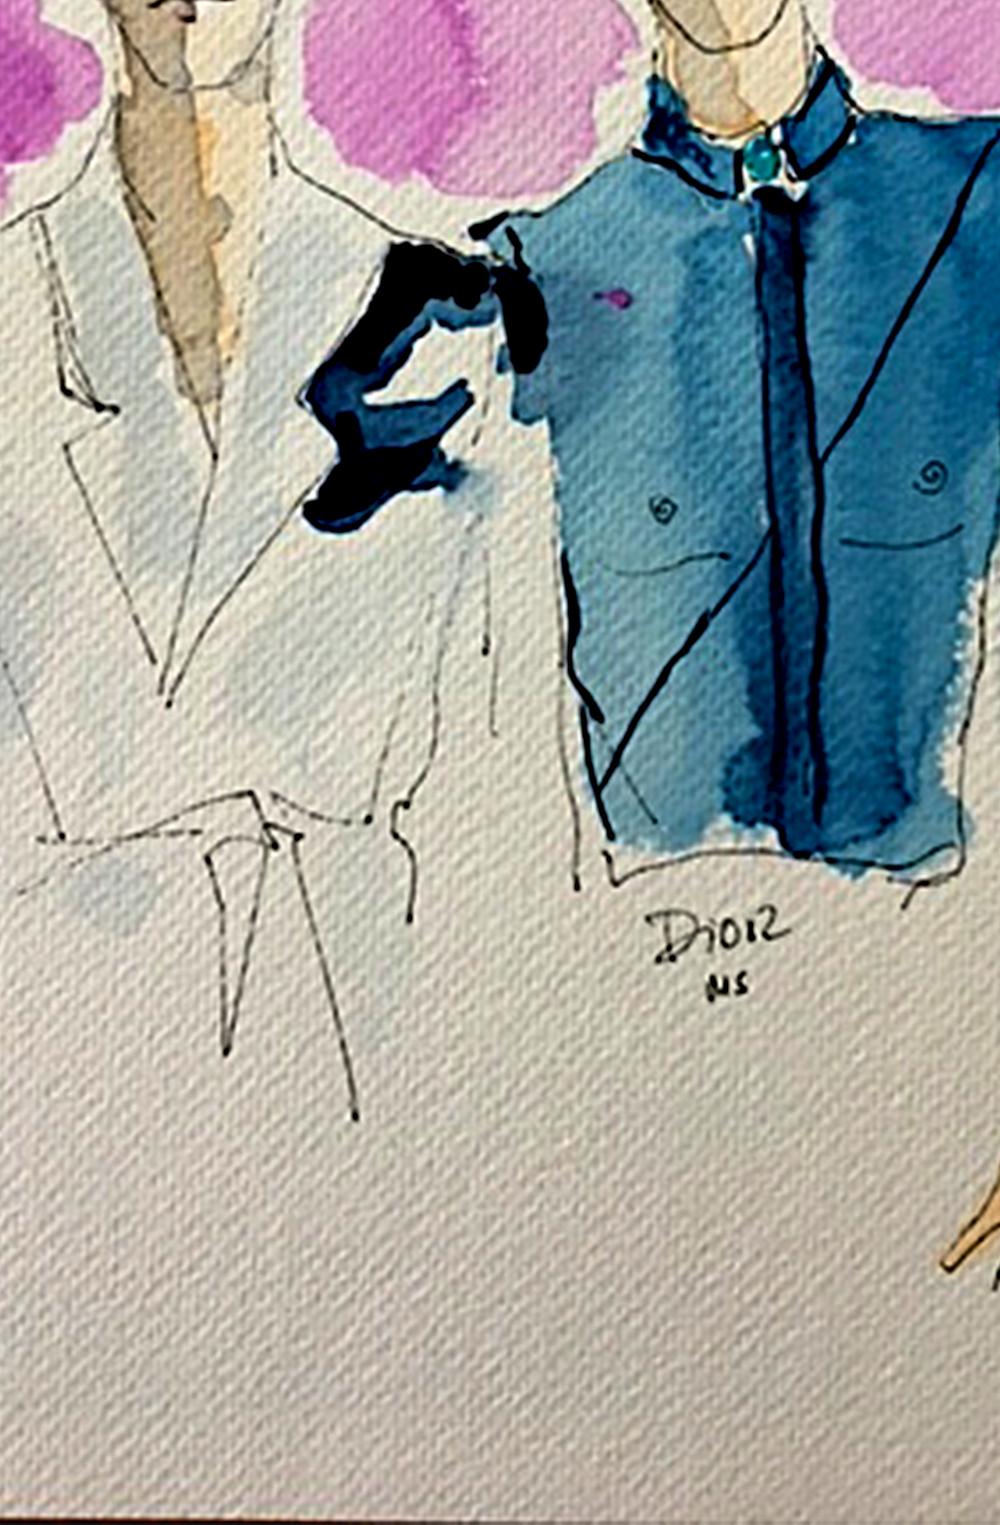 Dior, Fashion show models 2021. Watercolor fashion drawing on paper - Contemporary Art by Manuel Santelices